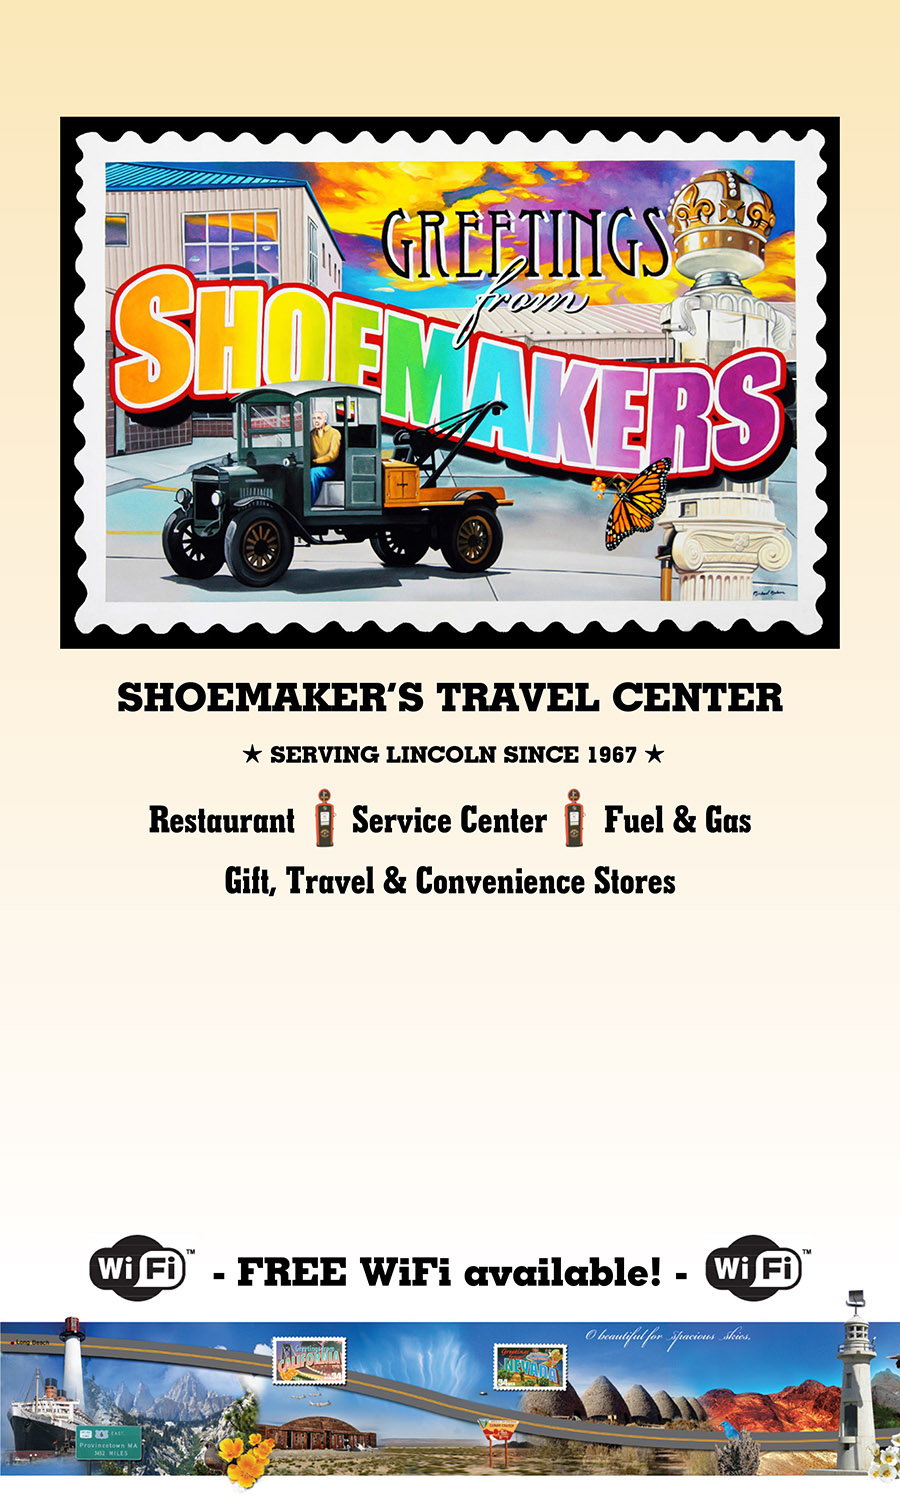 Shoemakers Travel Center Menu - Lincoln Nebraska
SHOEMAKER’S TRAVEL CENTER
SERVING LINCOLN SINCE 1967 
Restaurant  •  Service Center  •  Fuel & Gas
Gift, Travel & Convenience Stores
FREE WiFi available! 